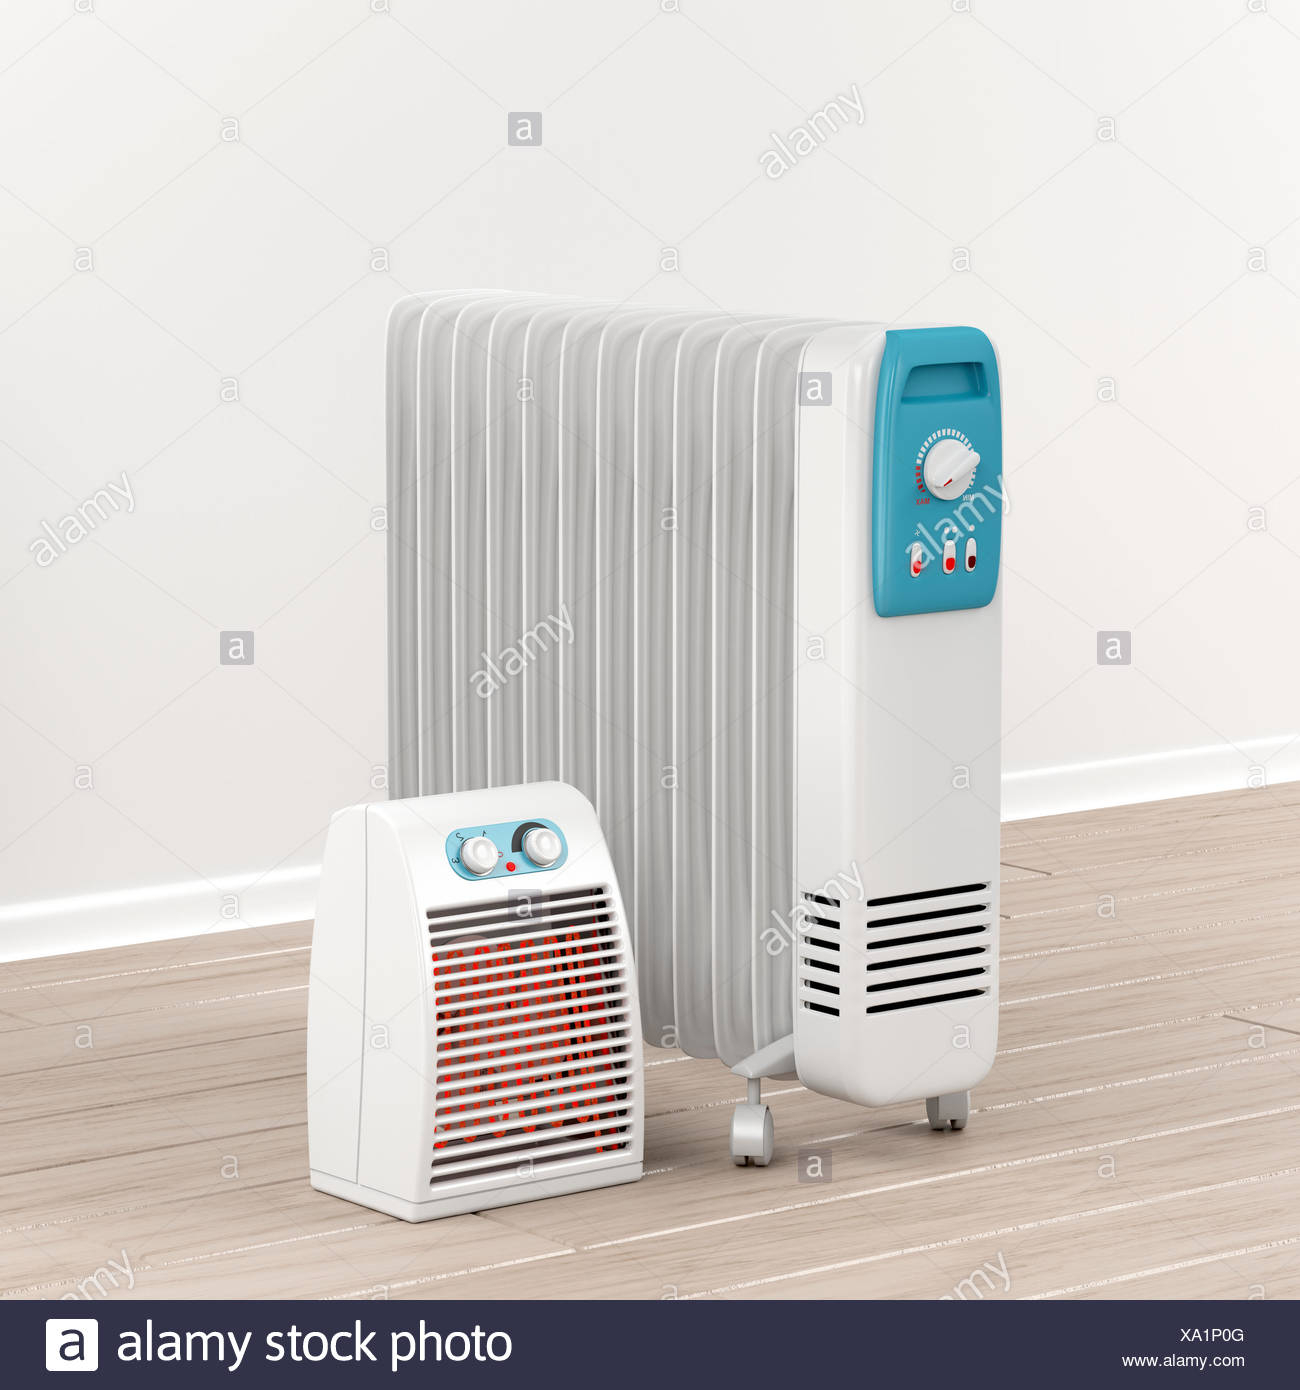 Oil Filled Radiator And Fan Heater Stock Photo 281551664 throughout size 1300 X 1390